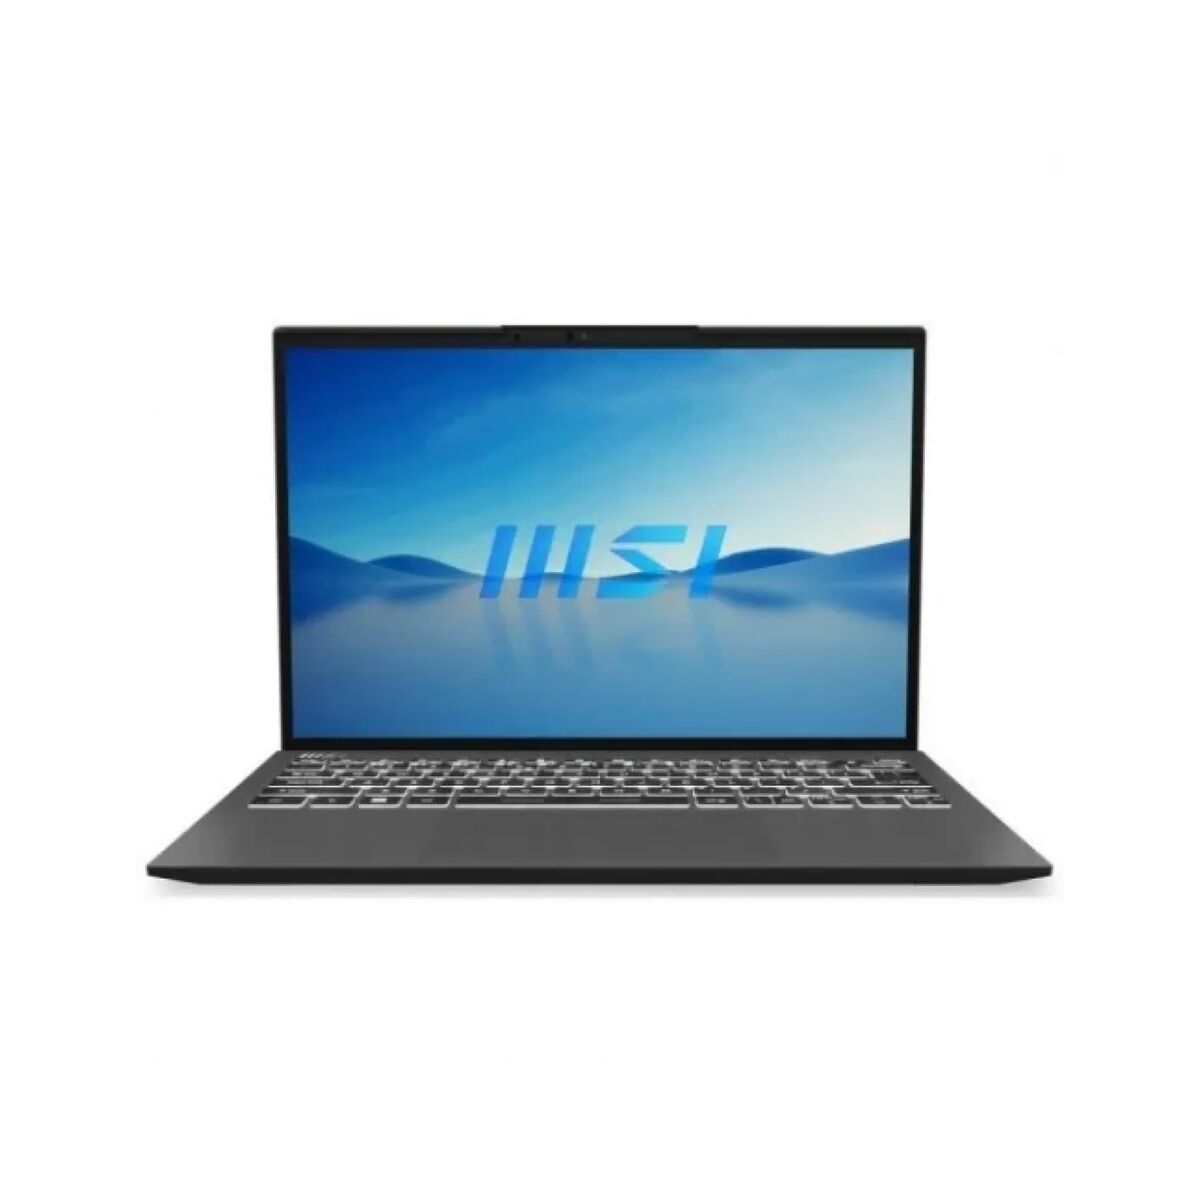 Laptop MSI 9S7-13Q112-068 Qwerty in Spagnolo 1 TB 13,3